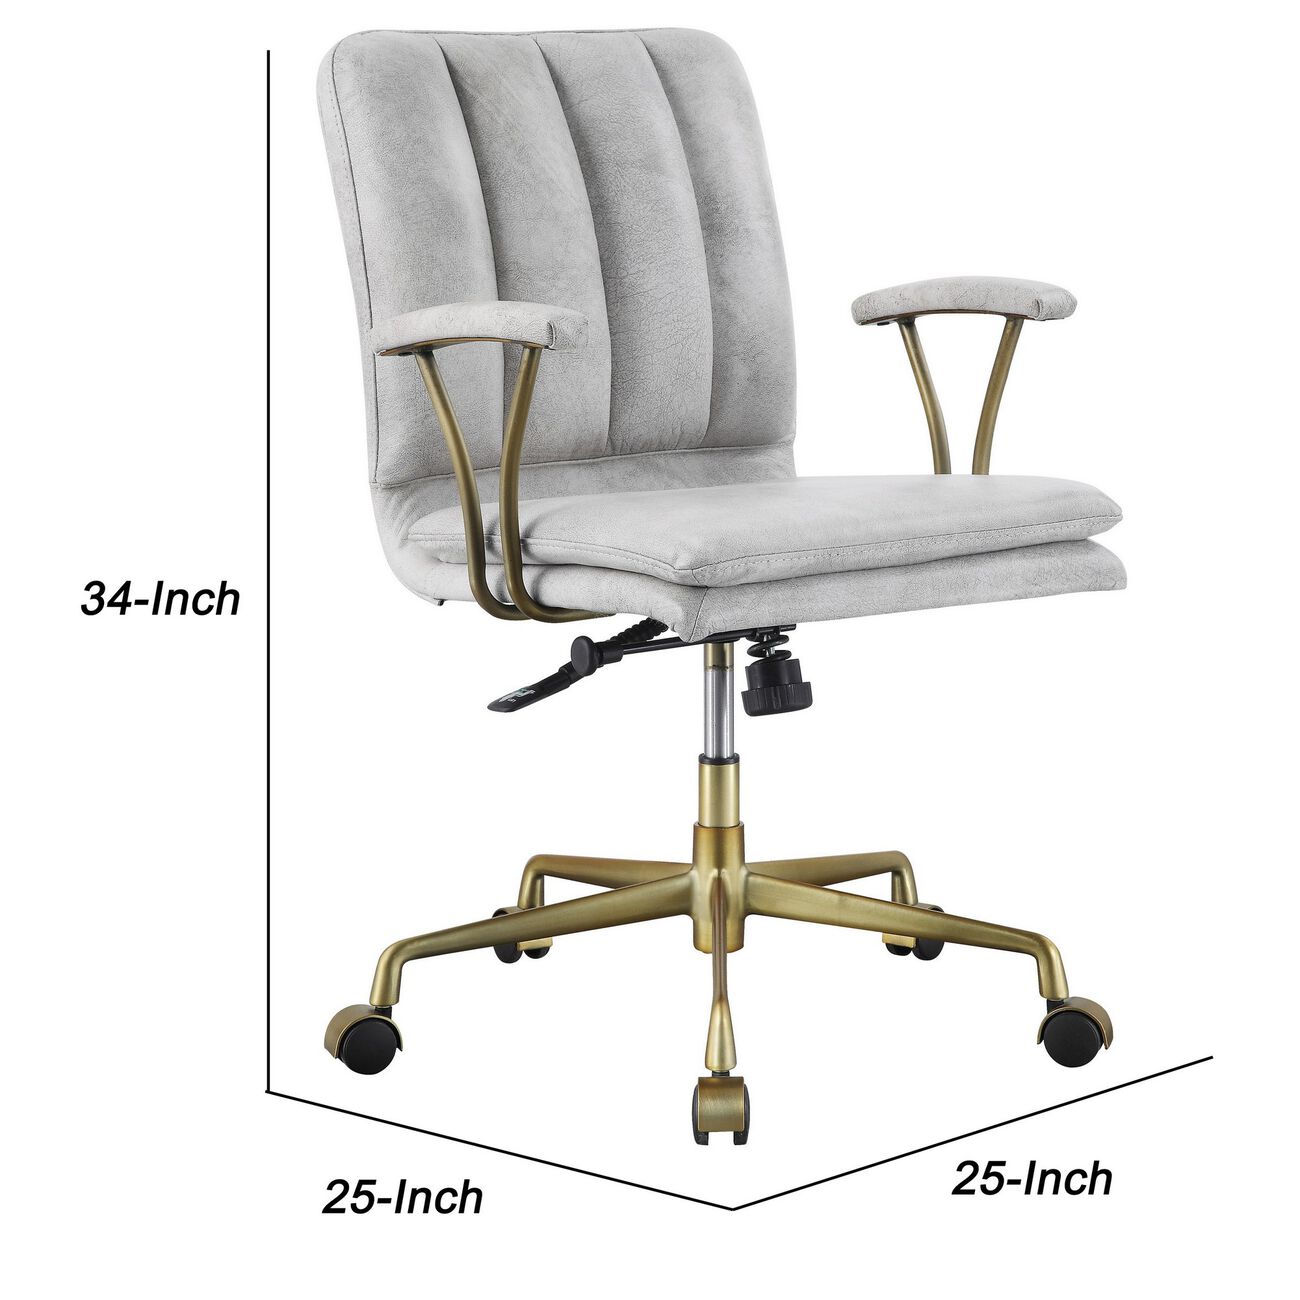 Adjustable Leatherette Swivel Office Chair with 5 Star Base, Gray and Gold